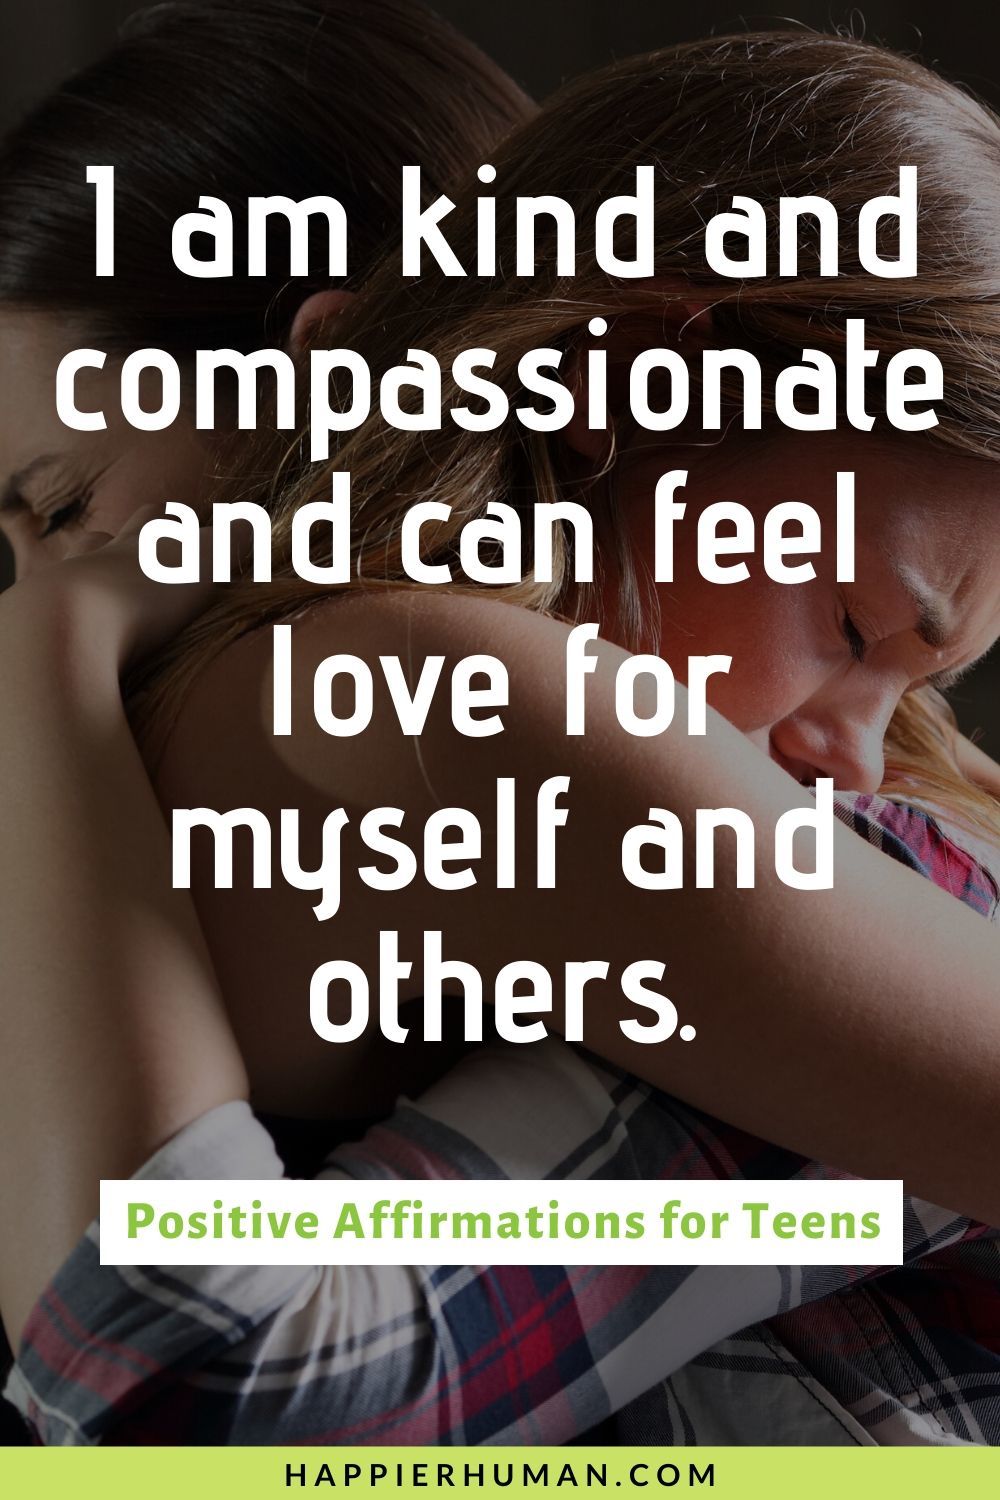 Positive Affirmations for Teens - I am kind and compassionate and can feel love for myself and others. | positive affirmations for autism | positive affirmations for kids with depression | little girl affirmations #teenagers #sayings #affirmation